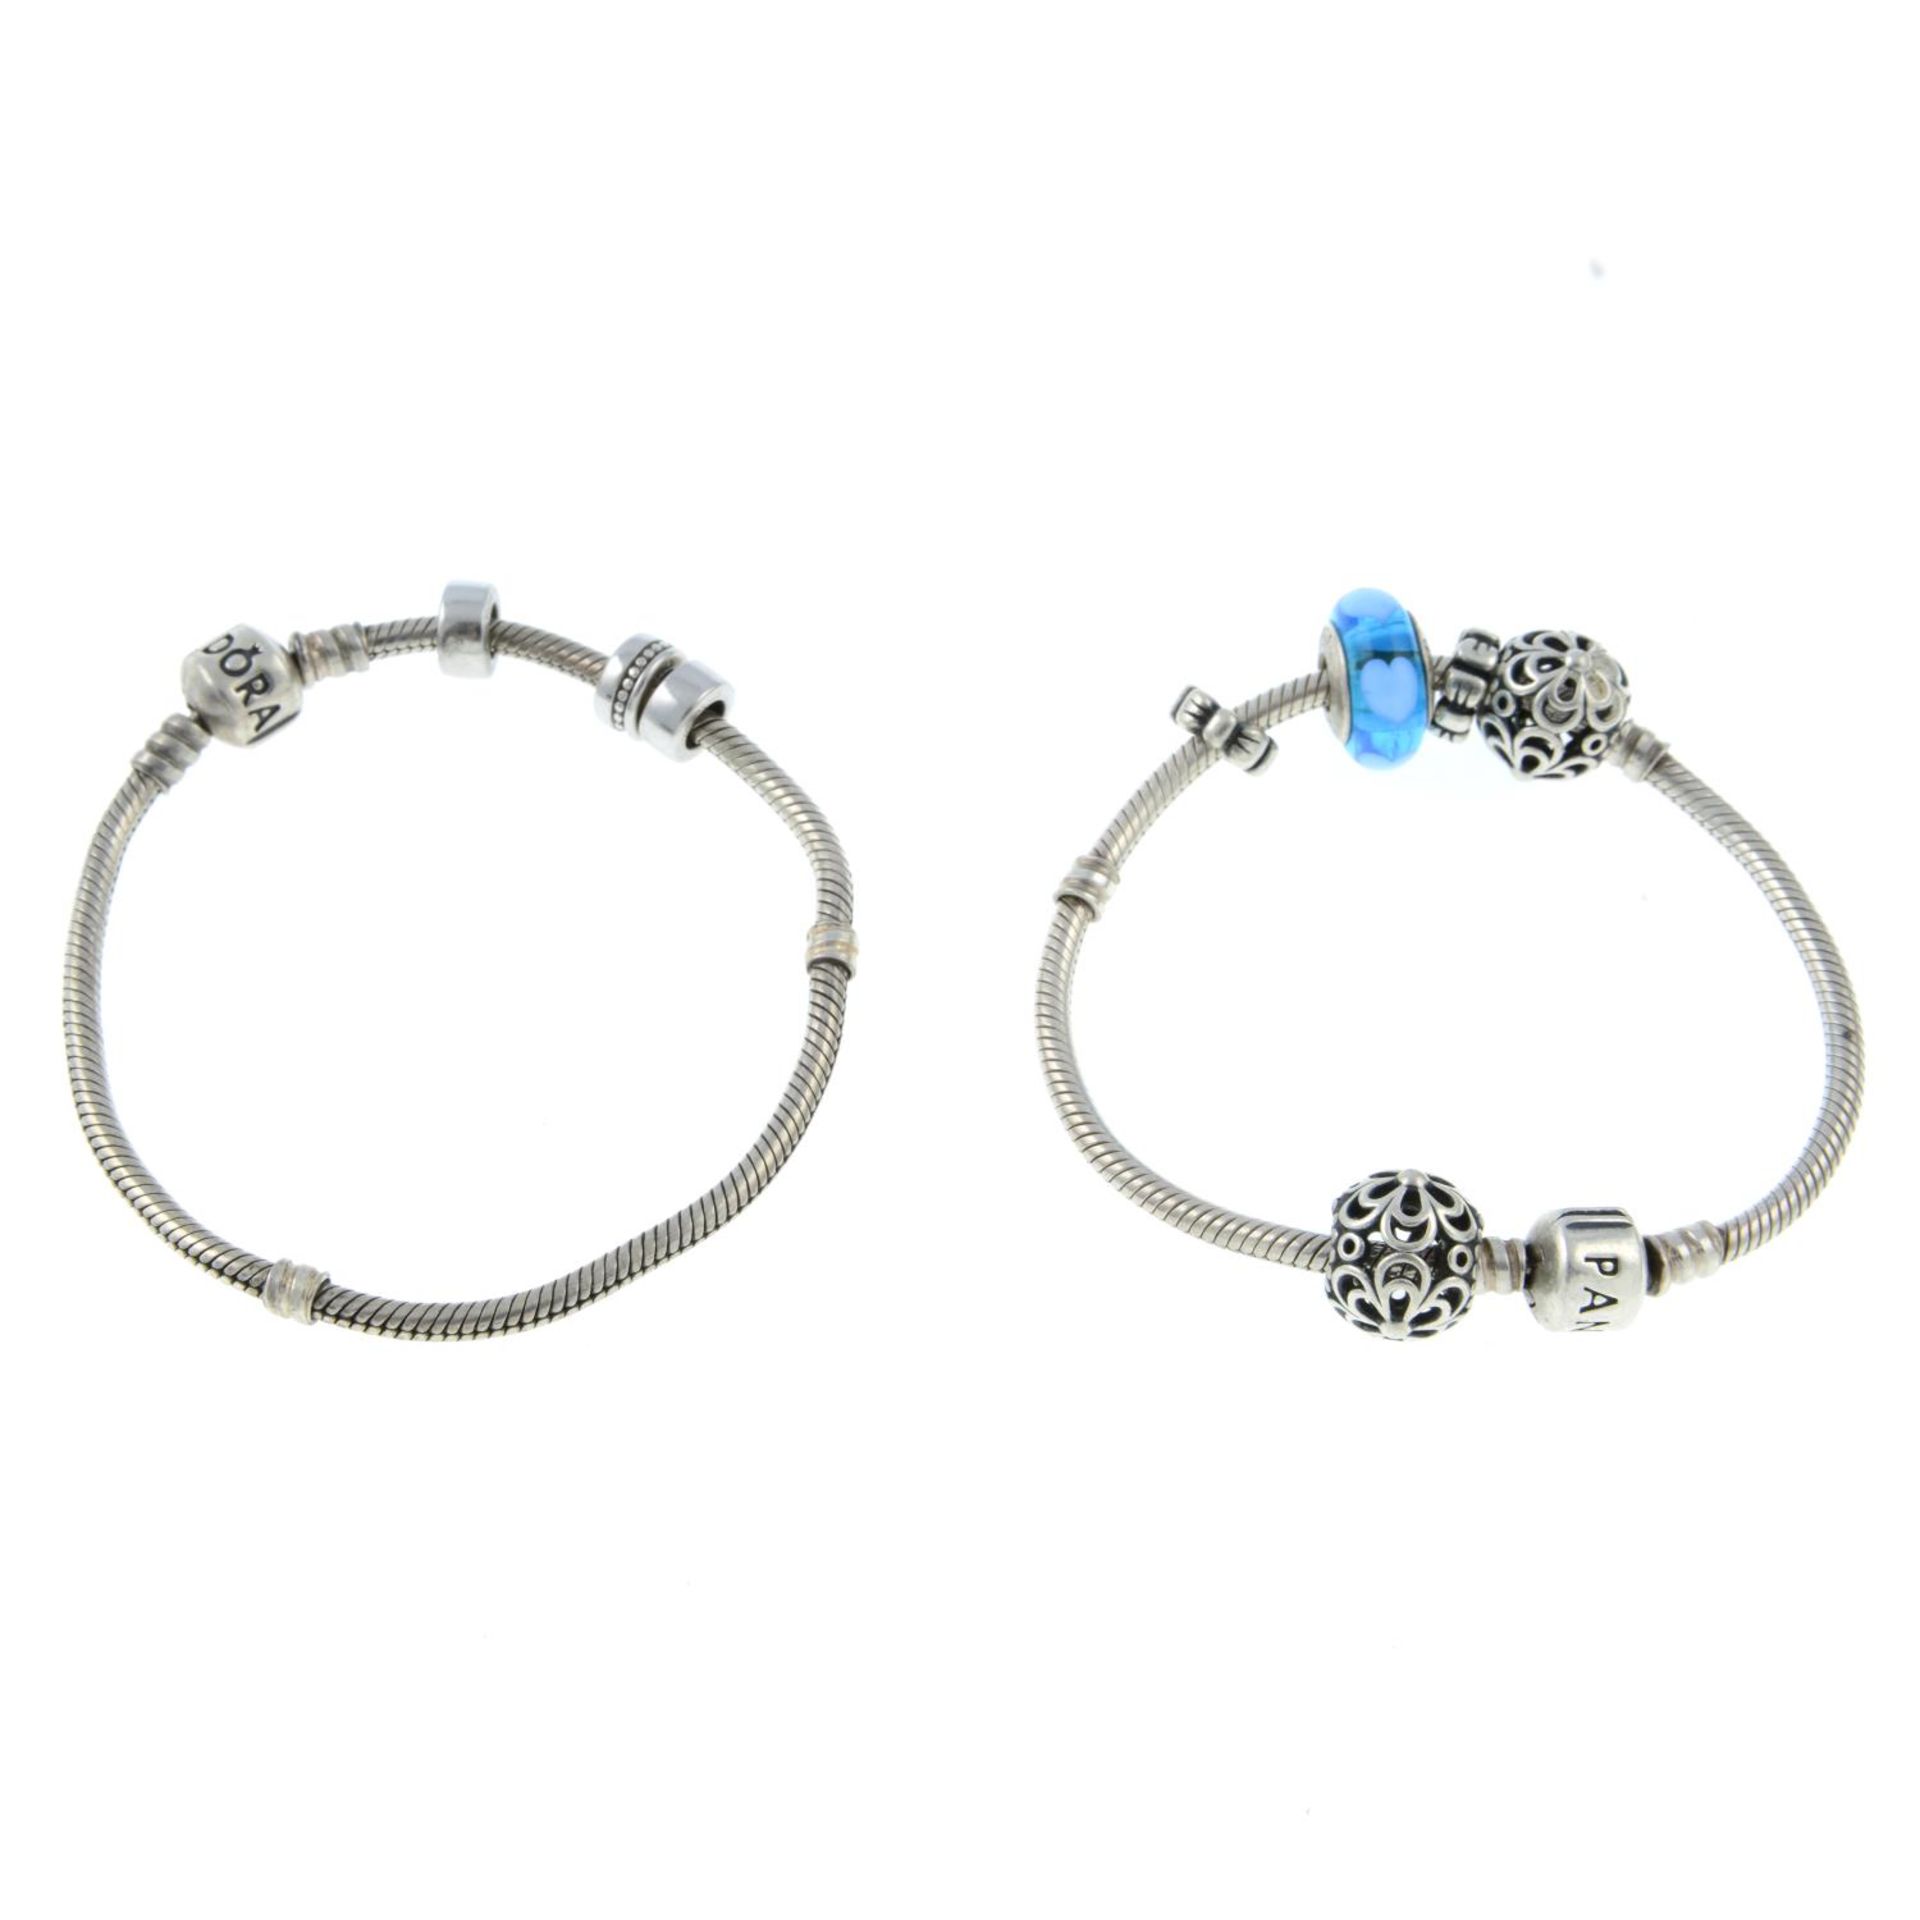 Two charm bracelets and eight charms, by Pandora.Both signed Pandora. - Image 2 of 2